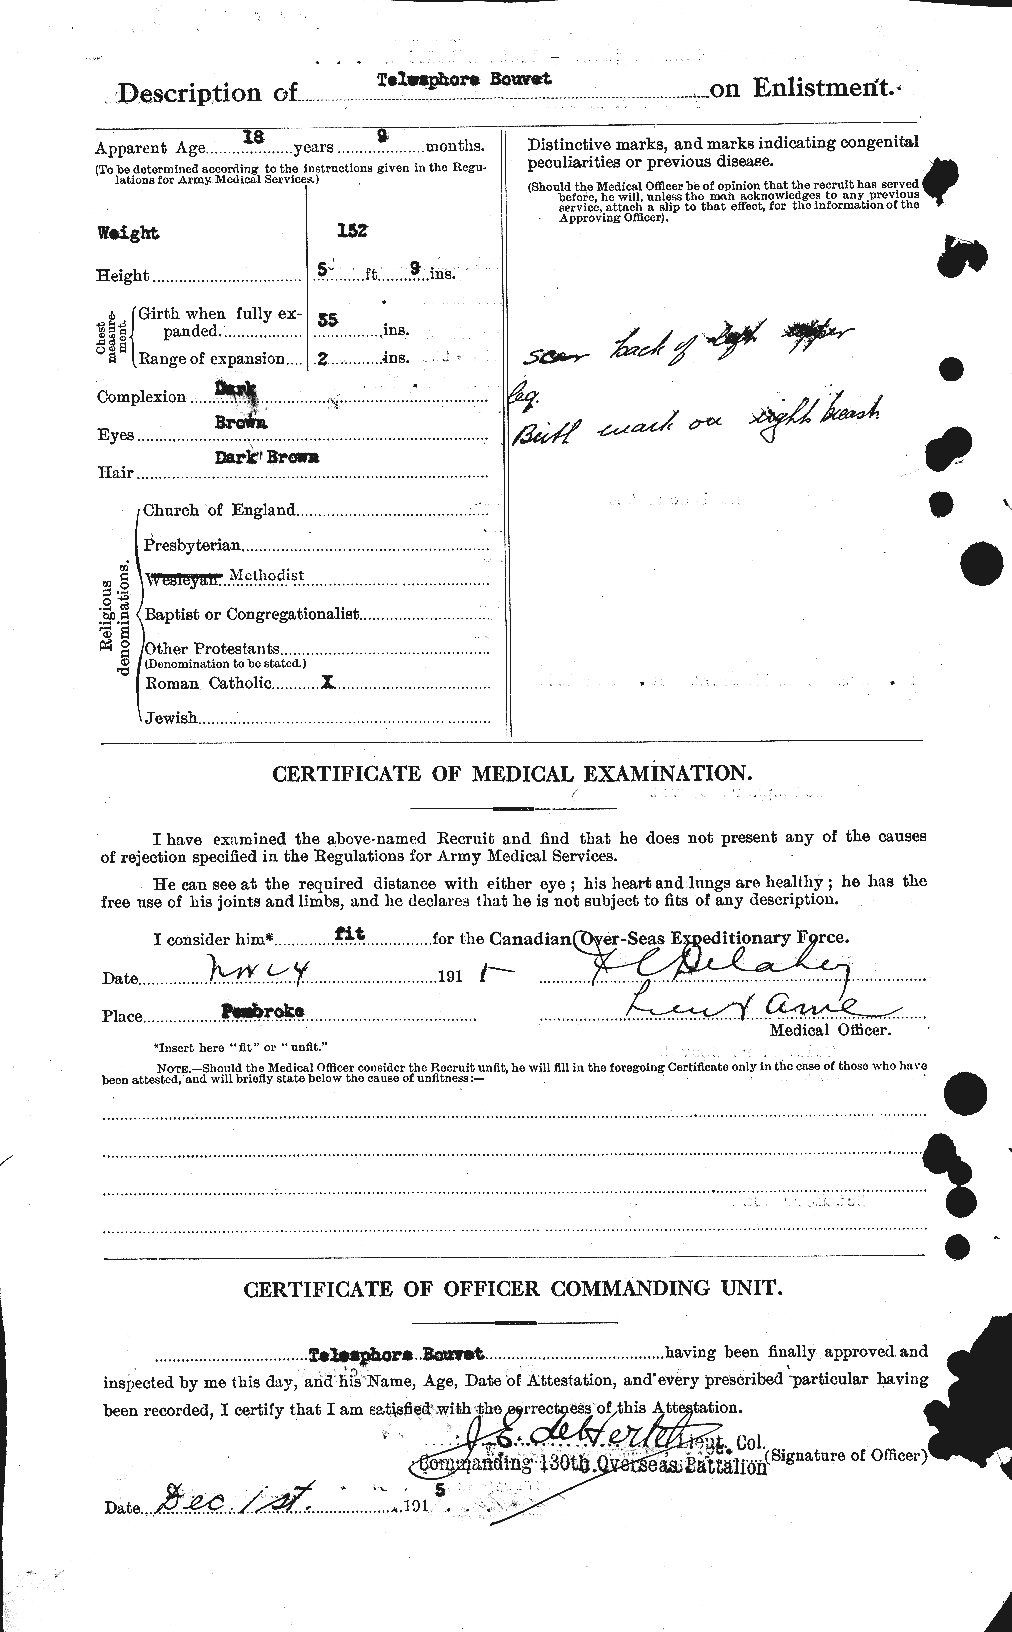 Personnel Records of the First World War - CEF 254339b